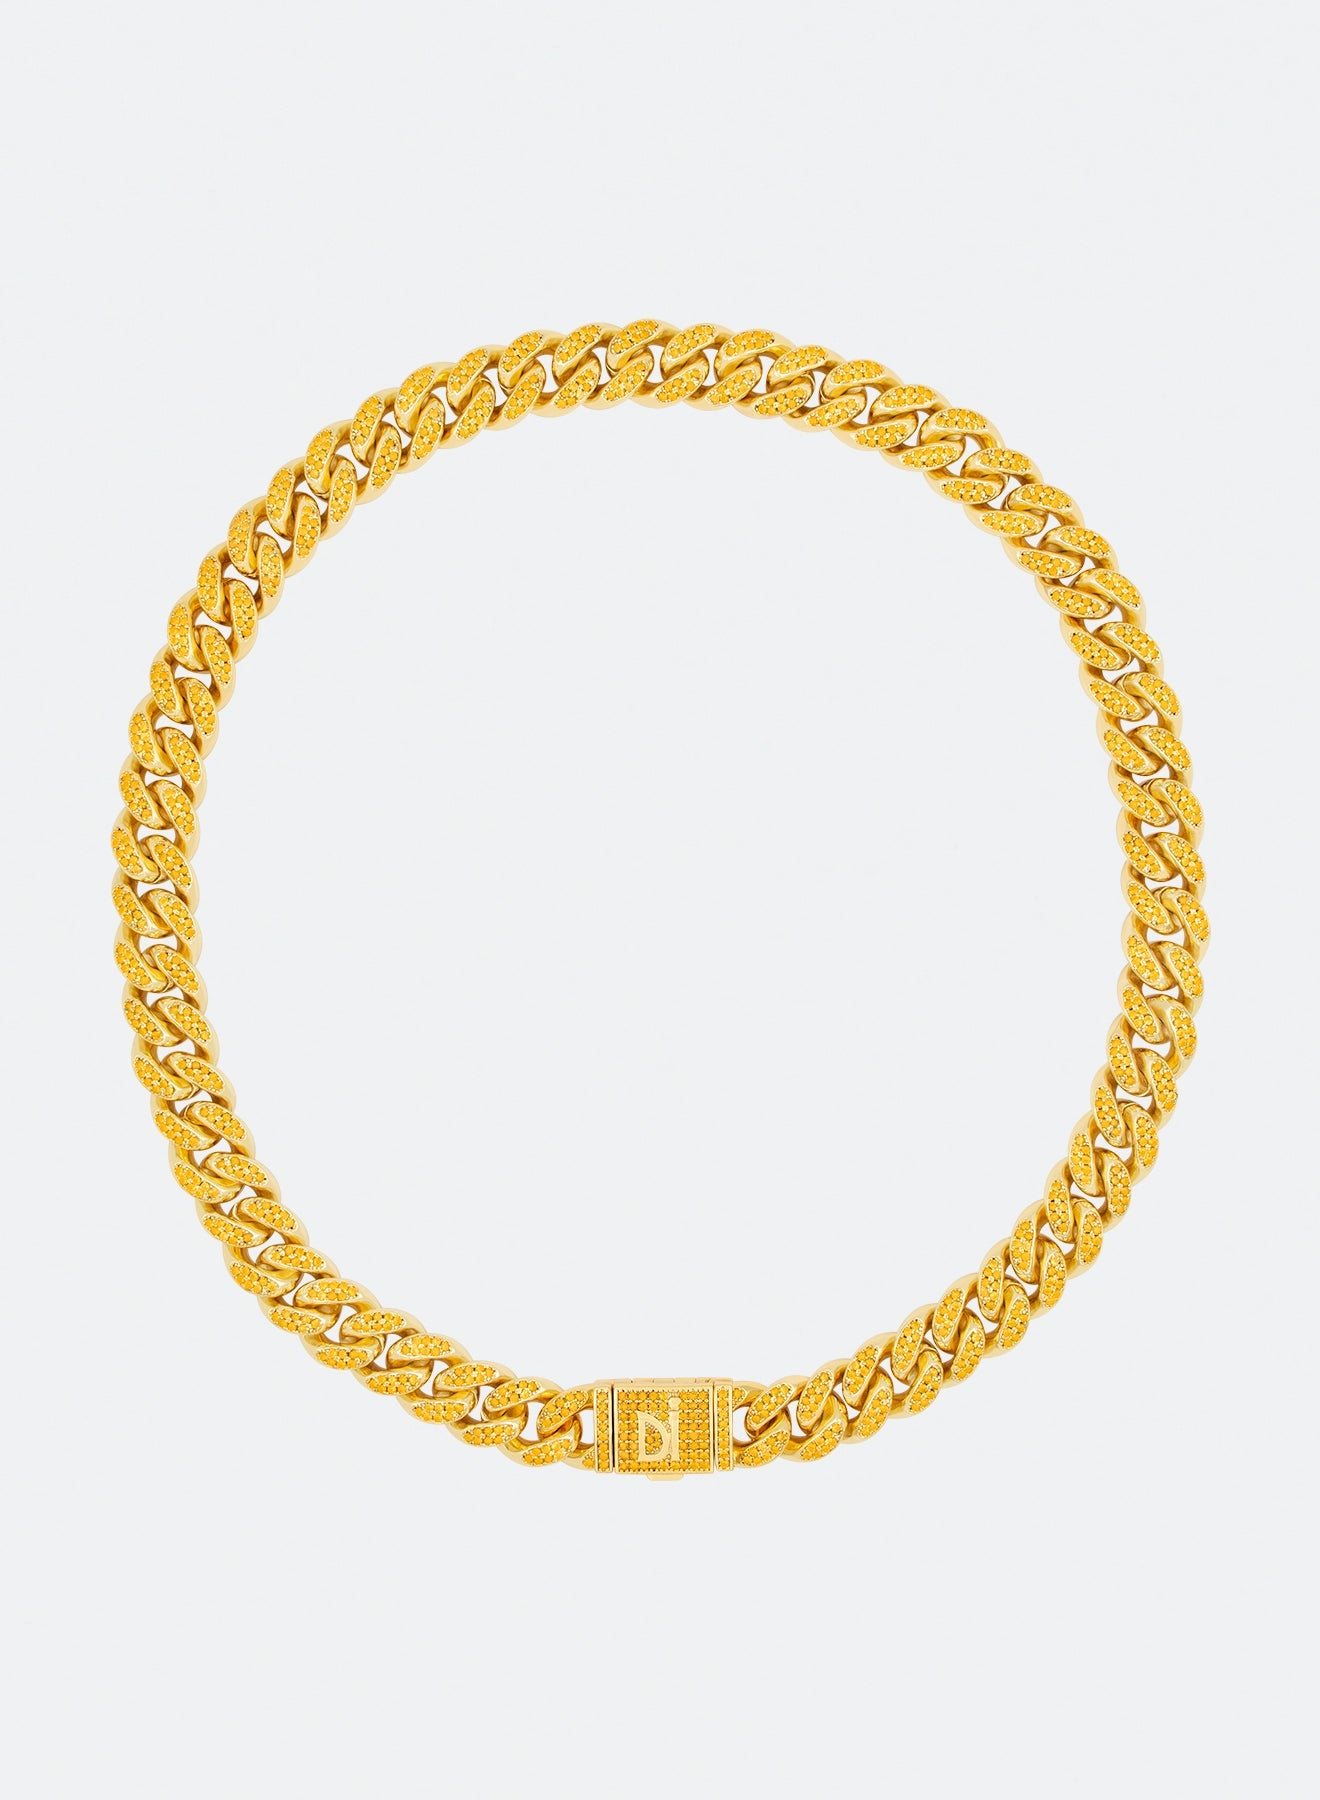 18k yellow gold coated cuban chain necklace with hand-set micropavé stones in tiger yellow